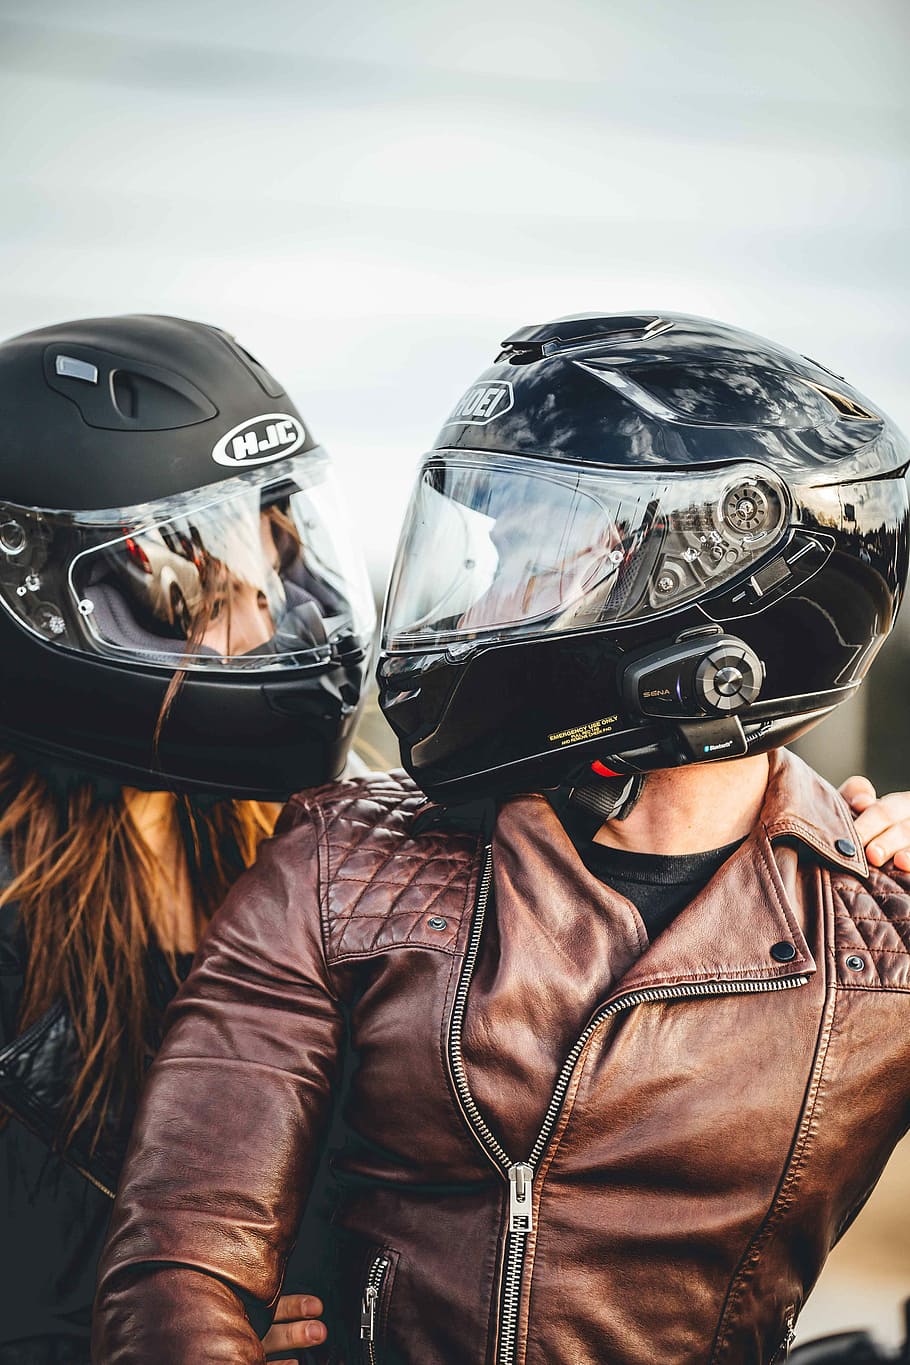 HD wallpaper: man and woman riding motorcycle, helmet, biker, couple, leather jacket